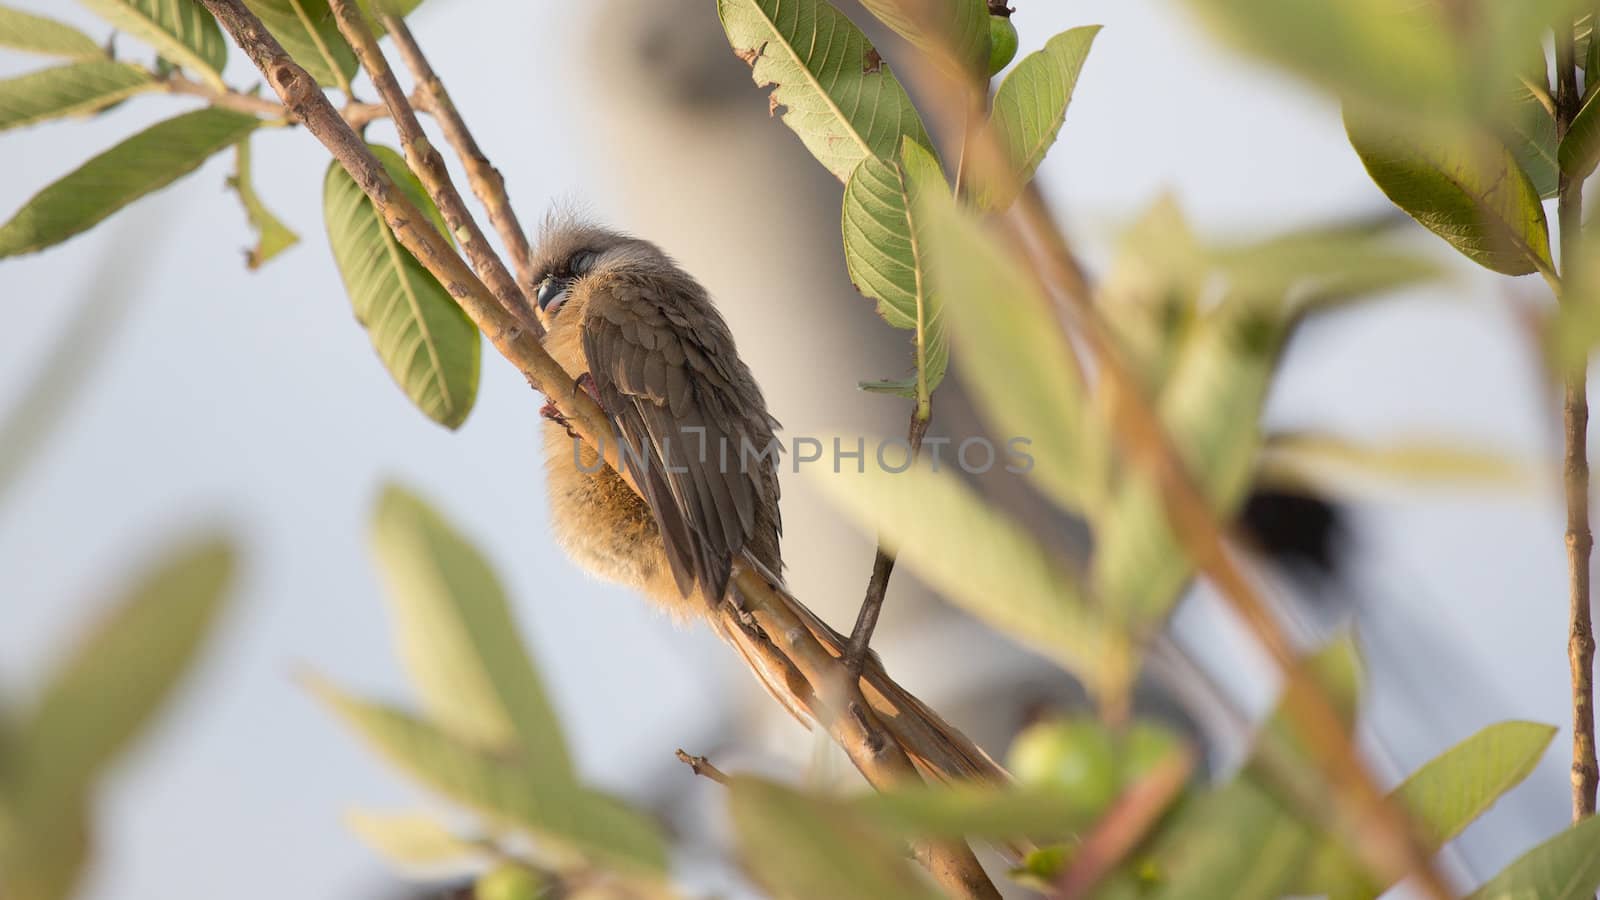 Sleepy Speckled Mousebird by derejeb